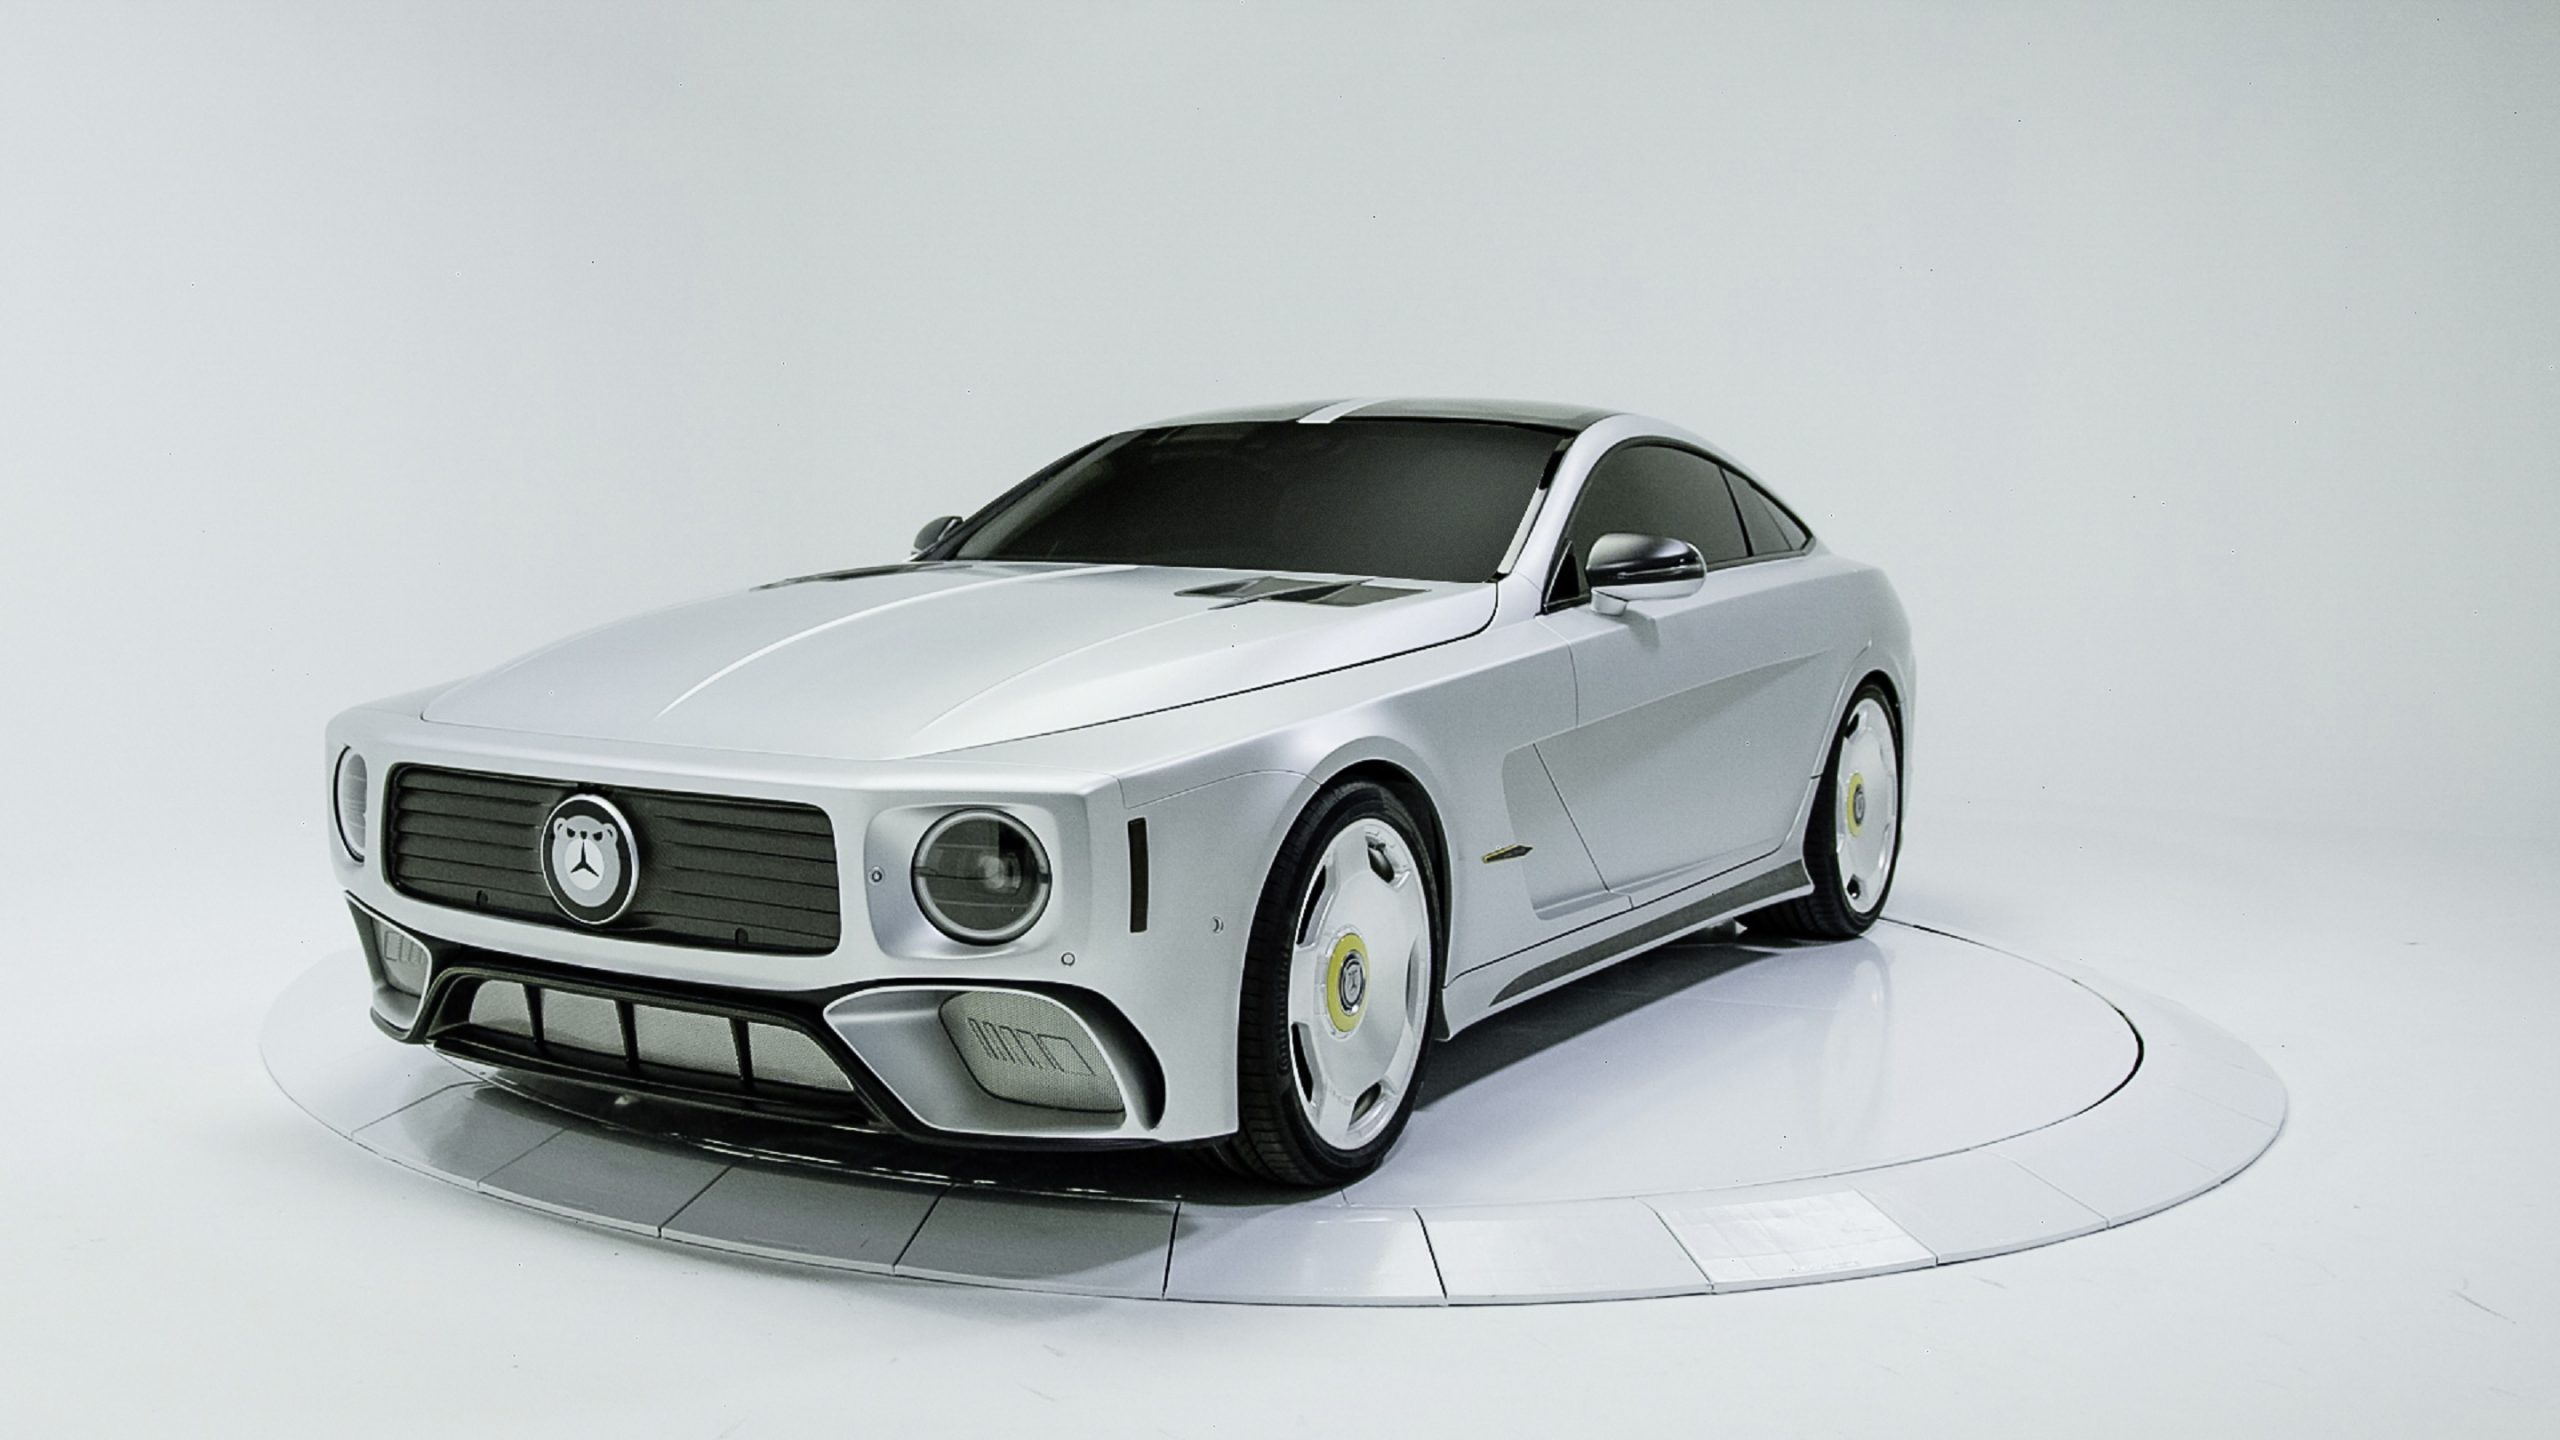 The white WILL.I.AMG Mercedes-AMG GT 4-Door concept in a white studio